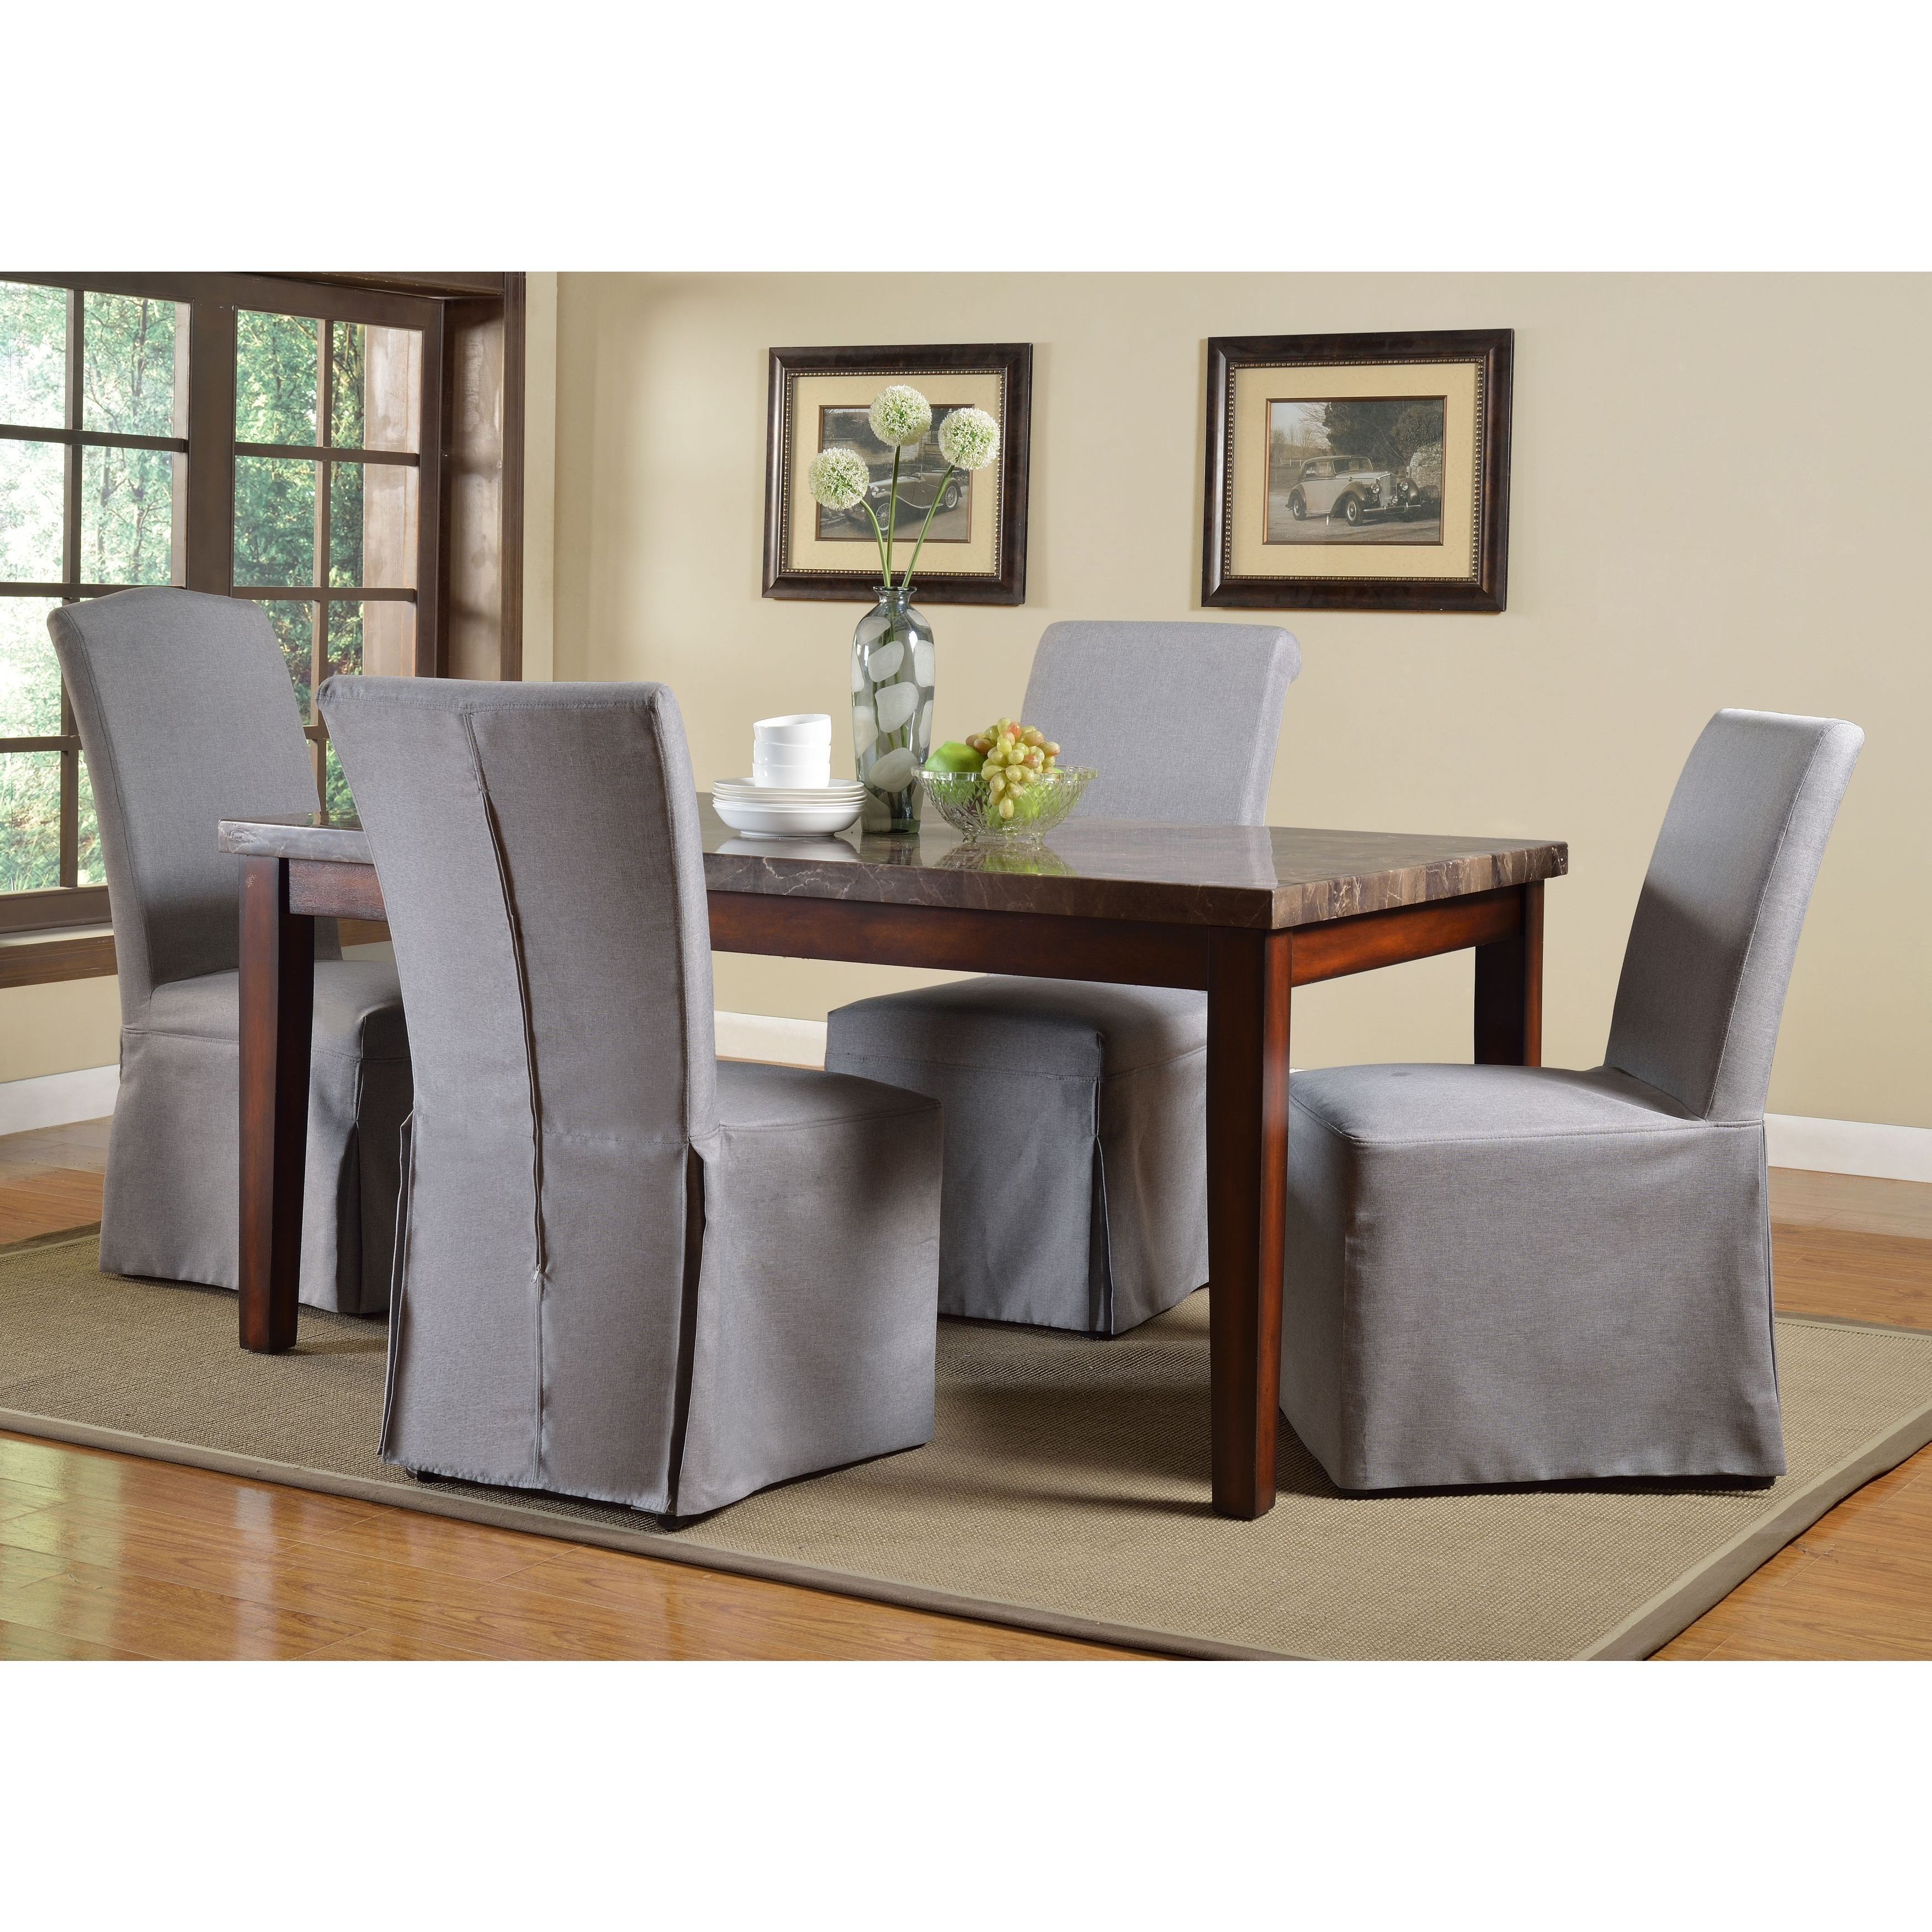 Garten Marble Skirted Side Chairs Set Of 2 Inside Popular Shop Domusindo Slipcovered Camelback Dining Chair (set Of 2) – Free (View 20 of 20)